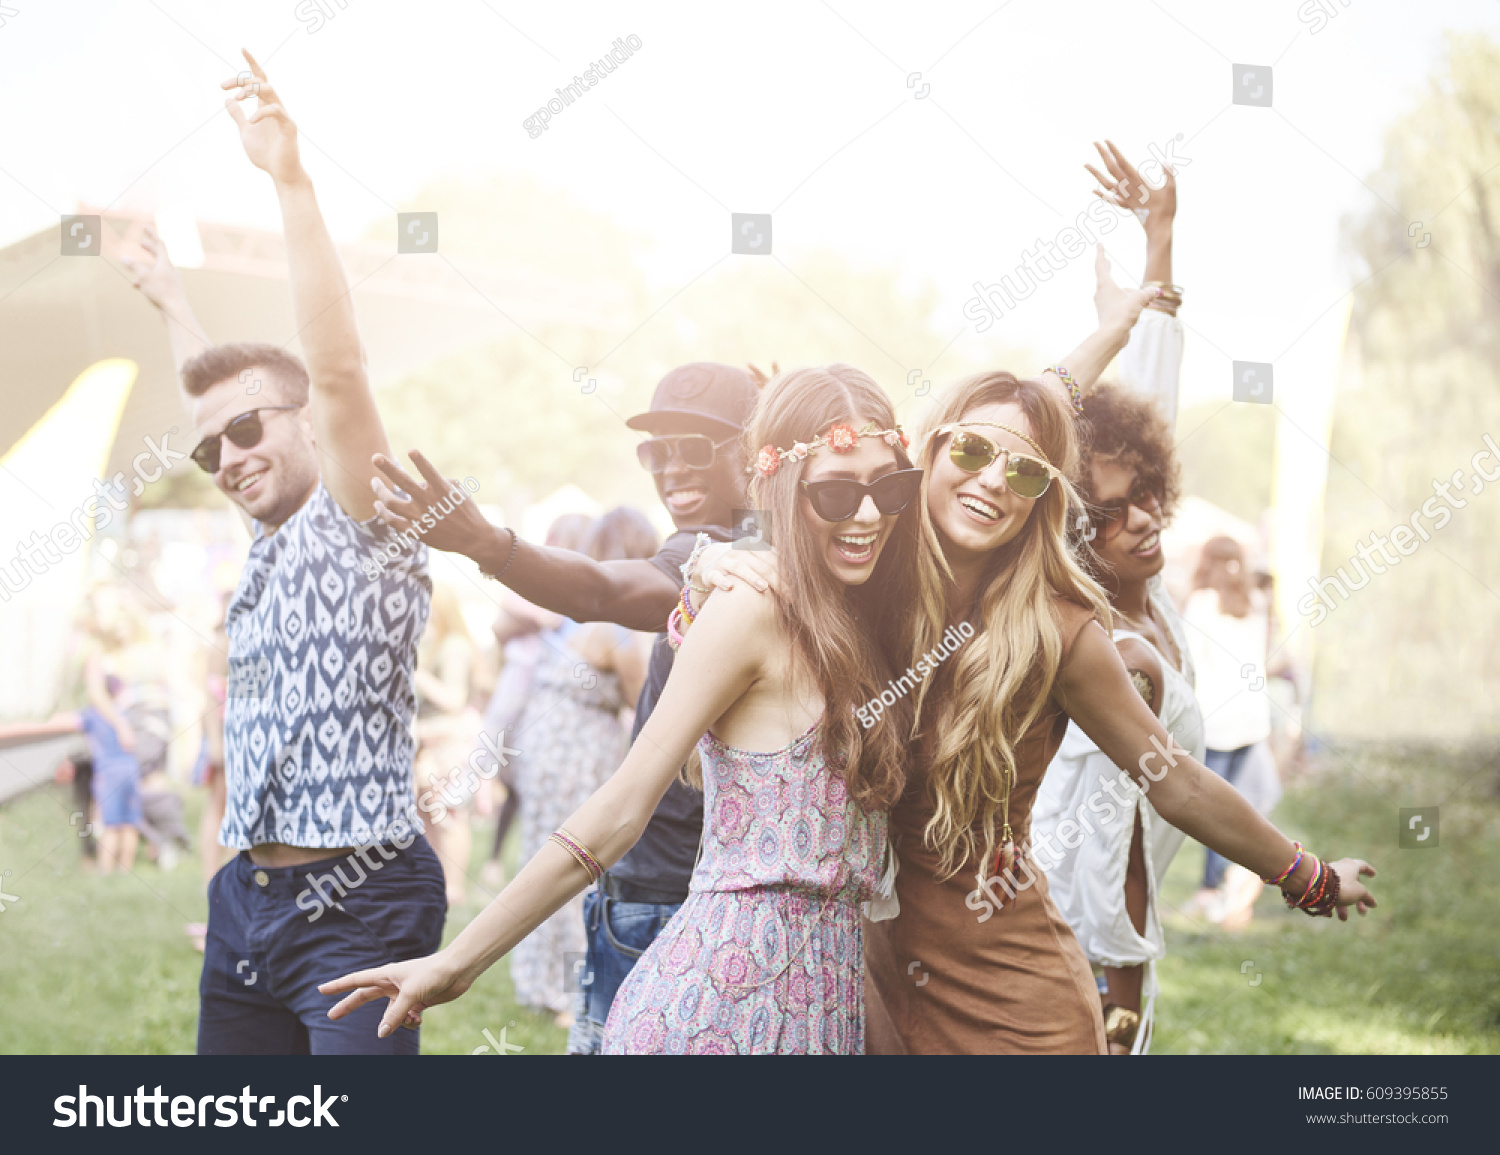 Enthusiastic crowd surfing at music festival  #609395855